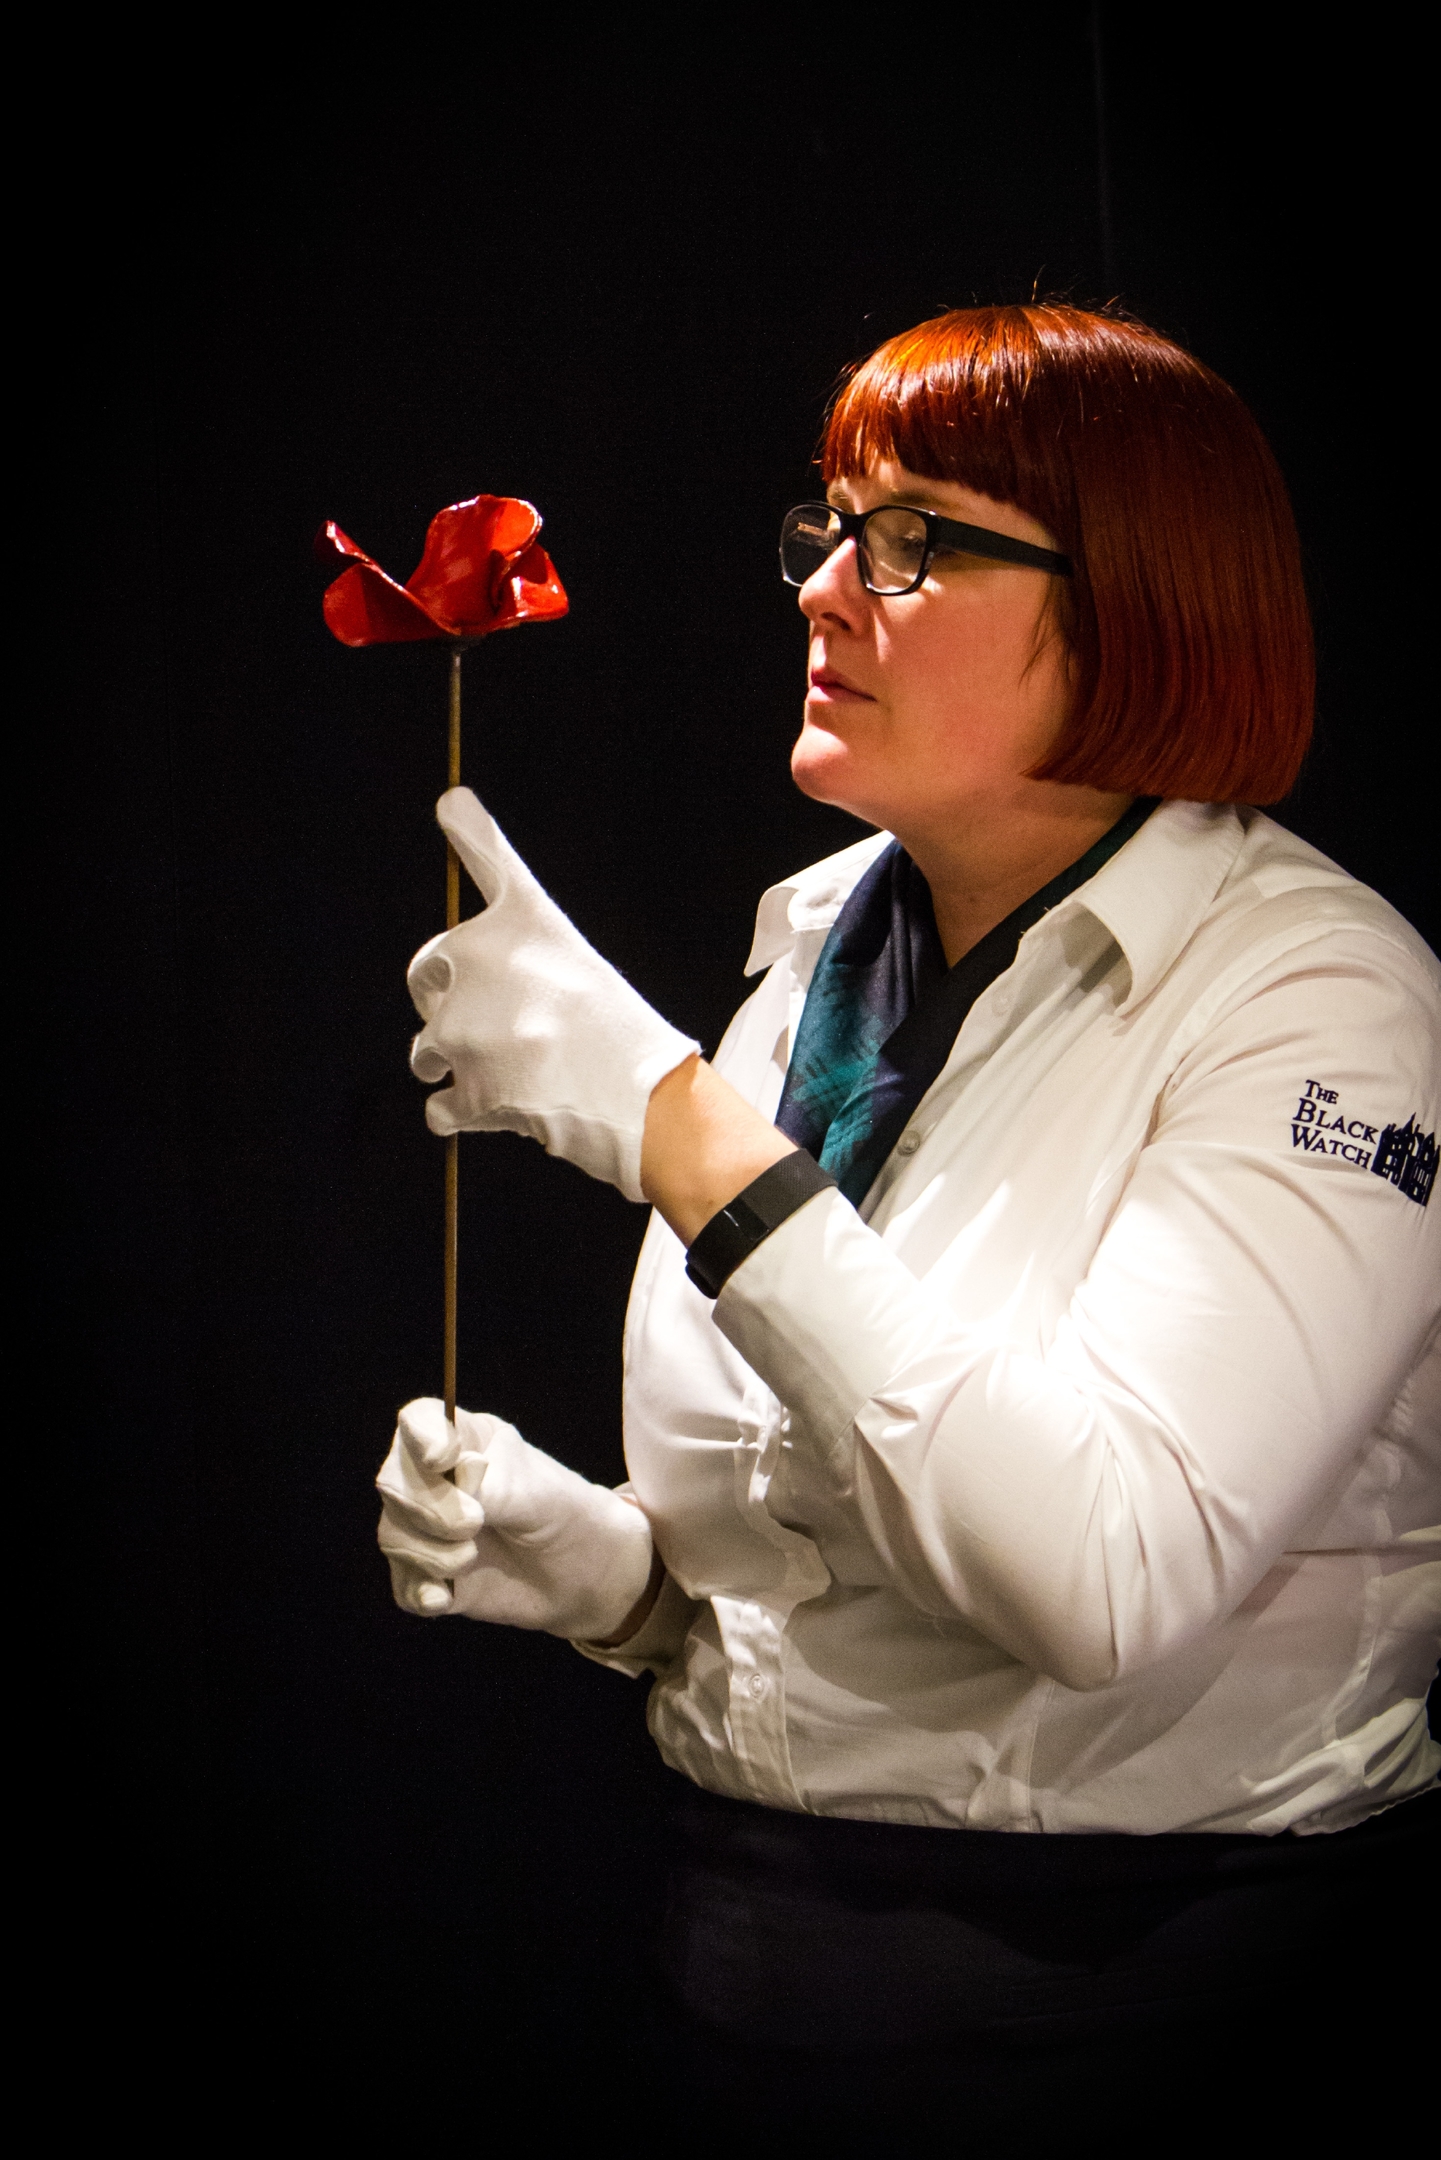 Balhousie Castle Museum Manager Emma Halford-Forbes, with one of the ceramic poppies; this particular poppy has been gifted to the museum and will remain on display at Balhousie Castle.